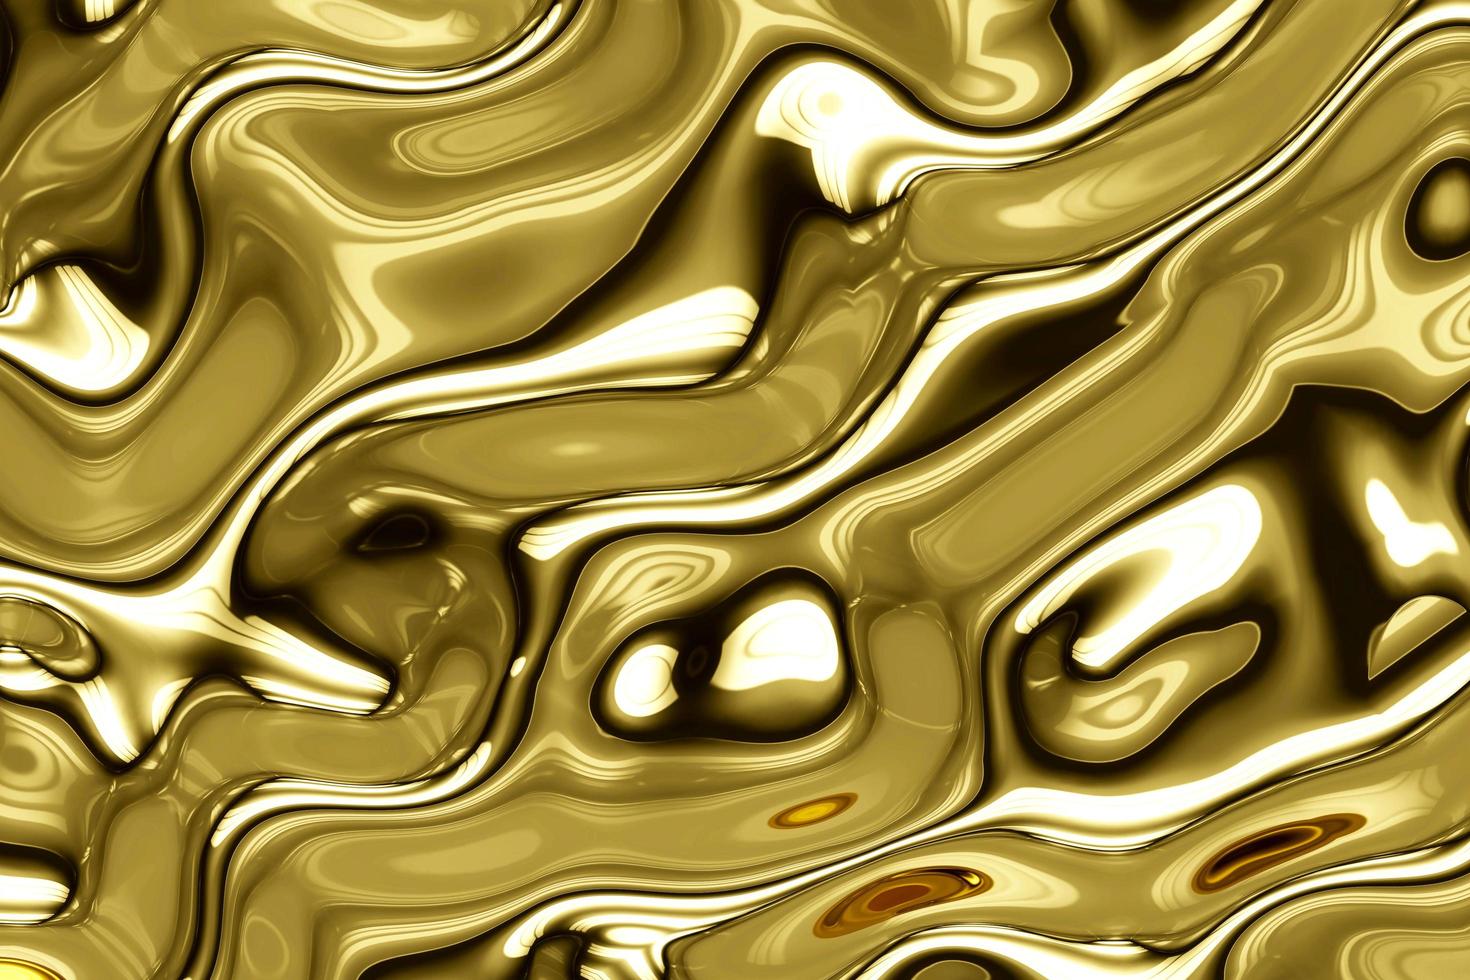 Gold metal texture with waves, liquid gold metallic silk wavy design, abstract background, 3D rendering photo